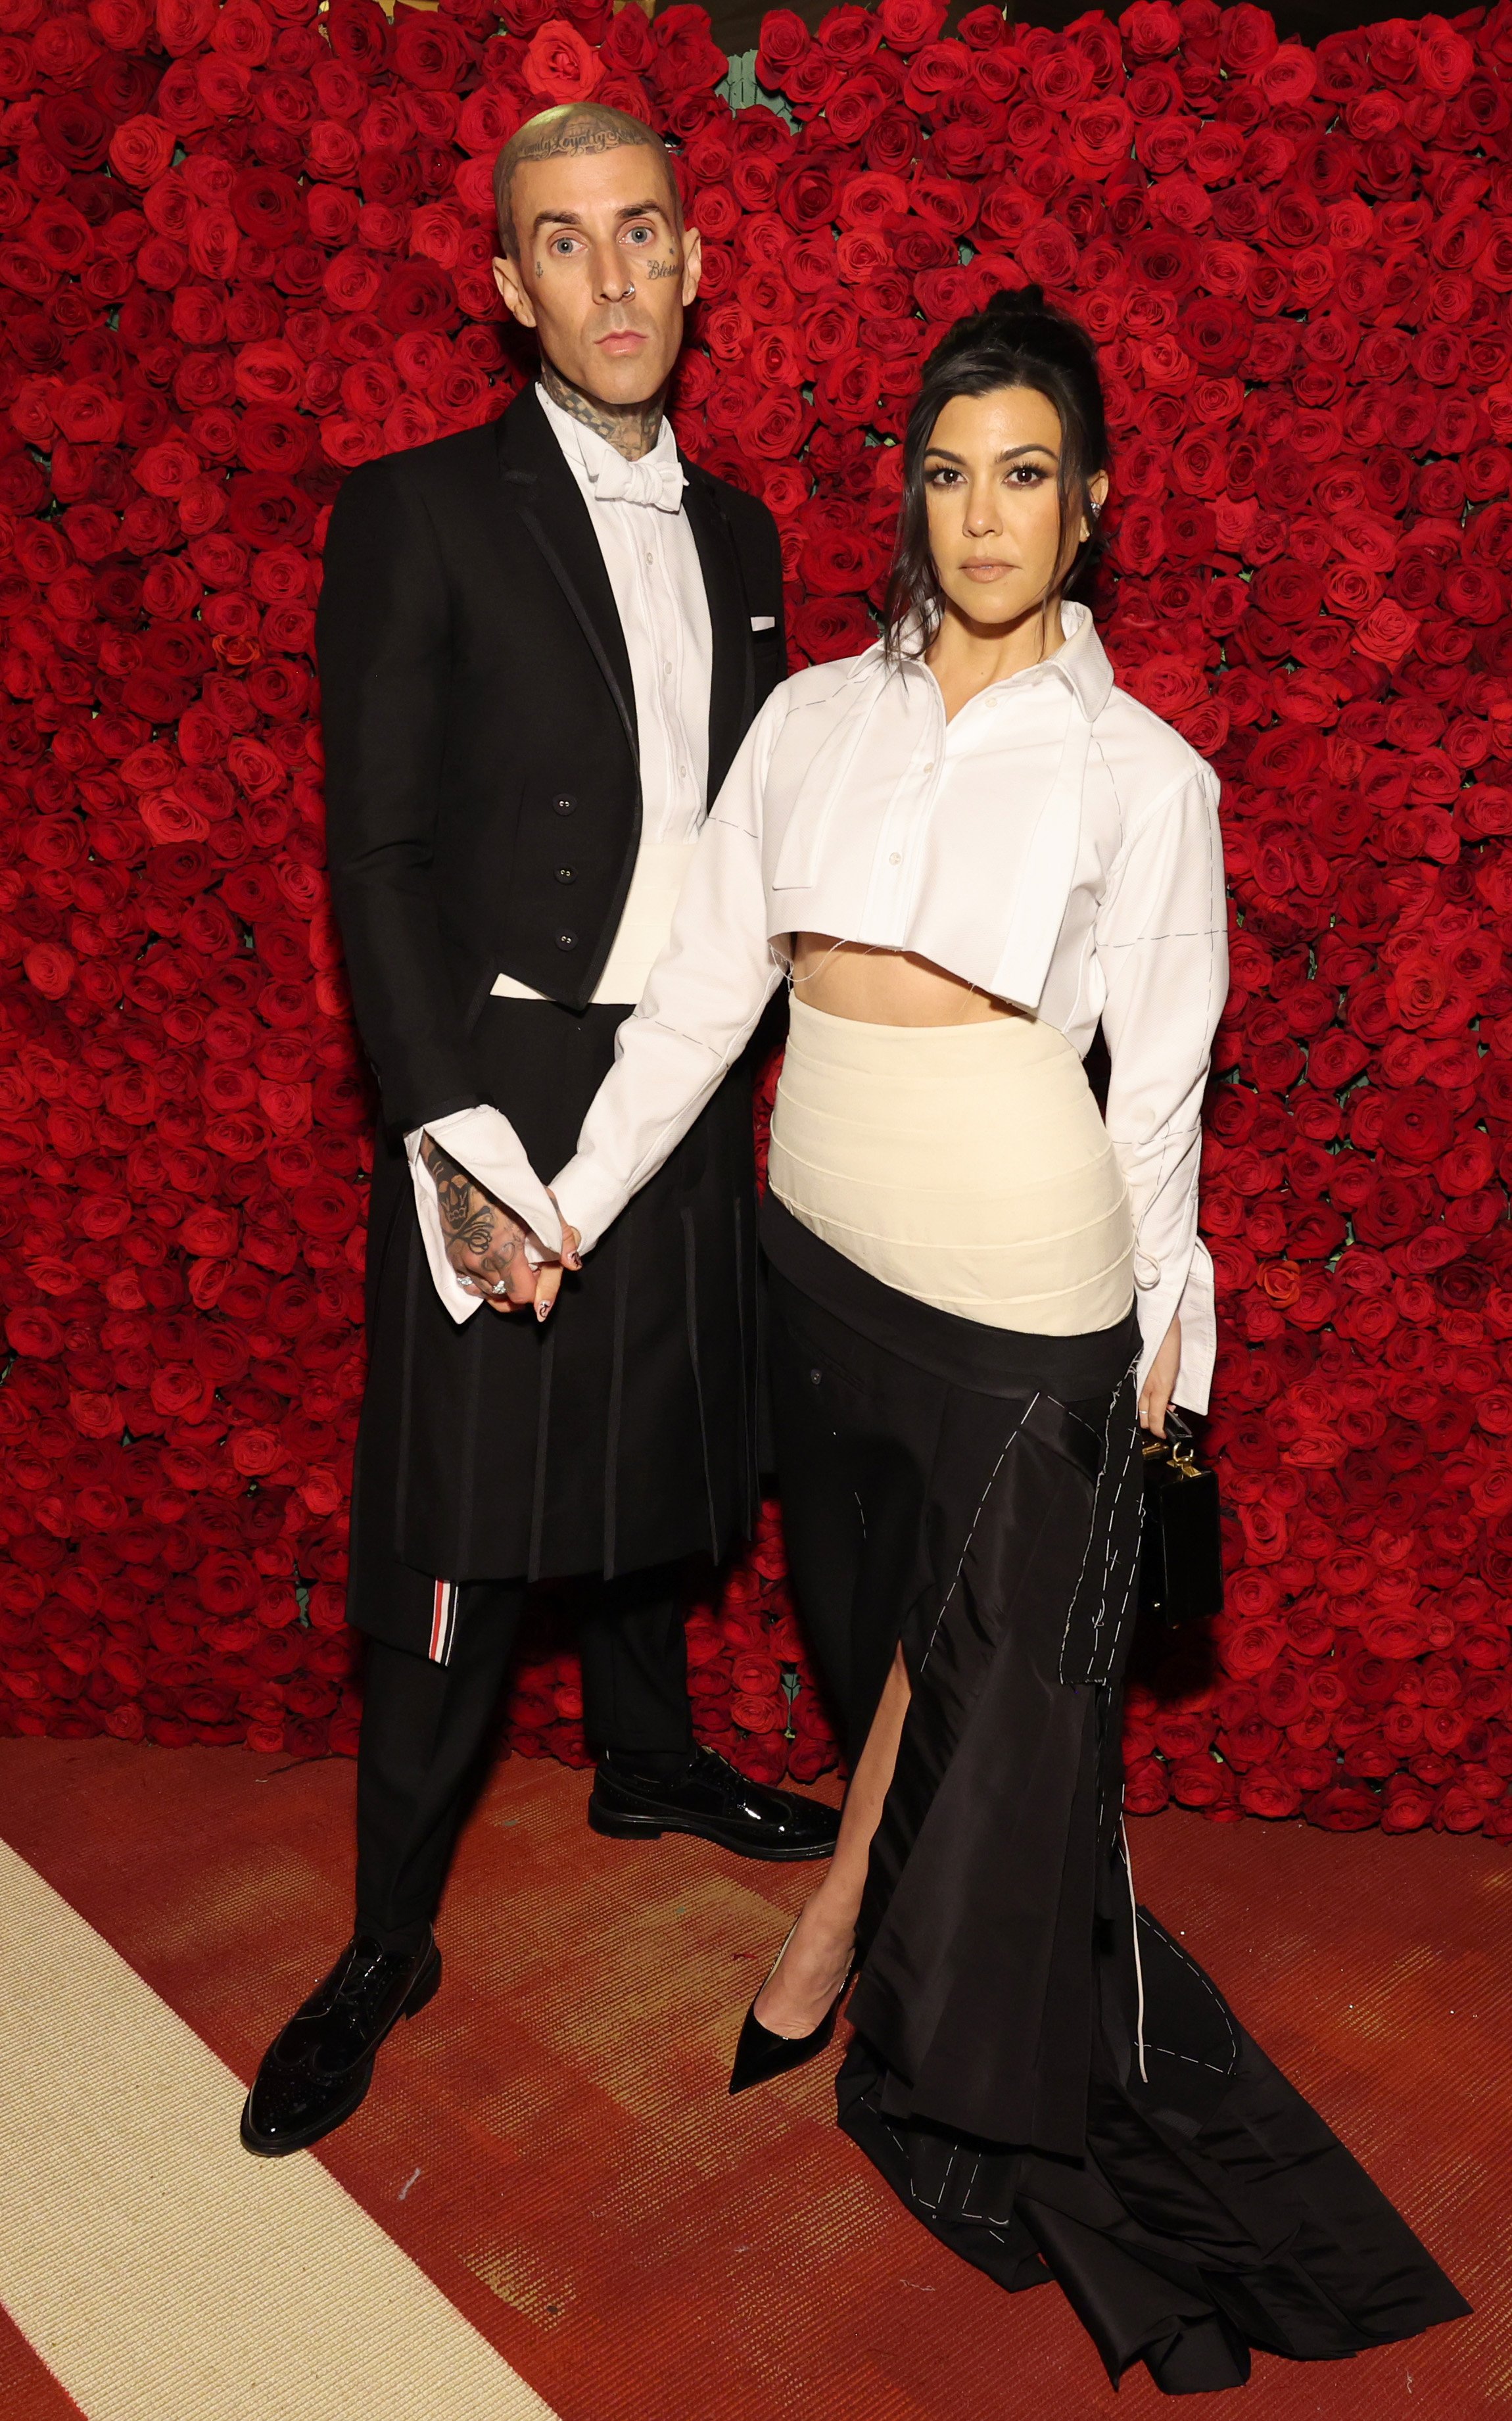  Travis Barker and Kourtney Kardashian arrive at The 2022 Met Gala Celebrating "In America: An Anthology of Fashion" at The Metropolitan Museum of Art on May 02, 2022, in New York City. | Source: Getty Images